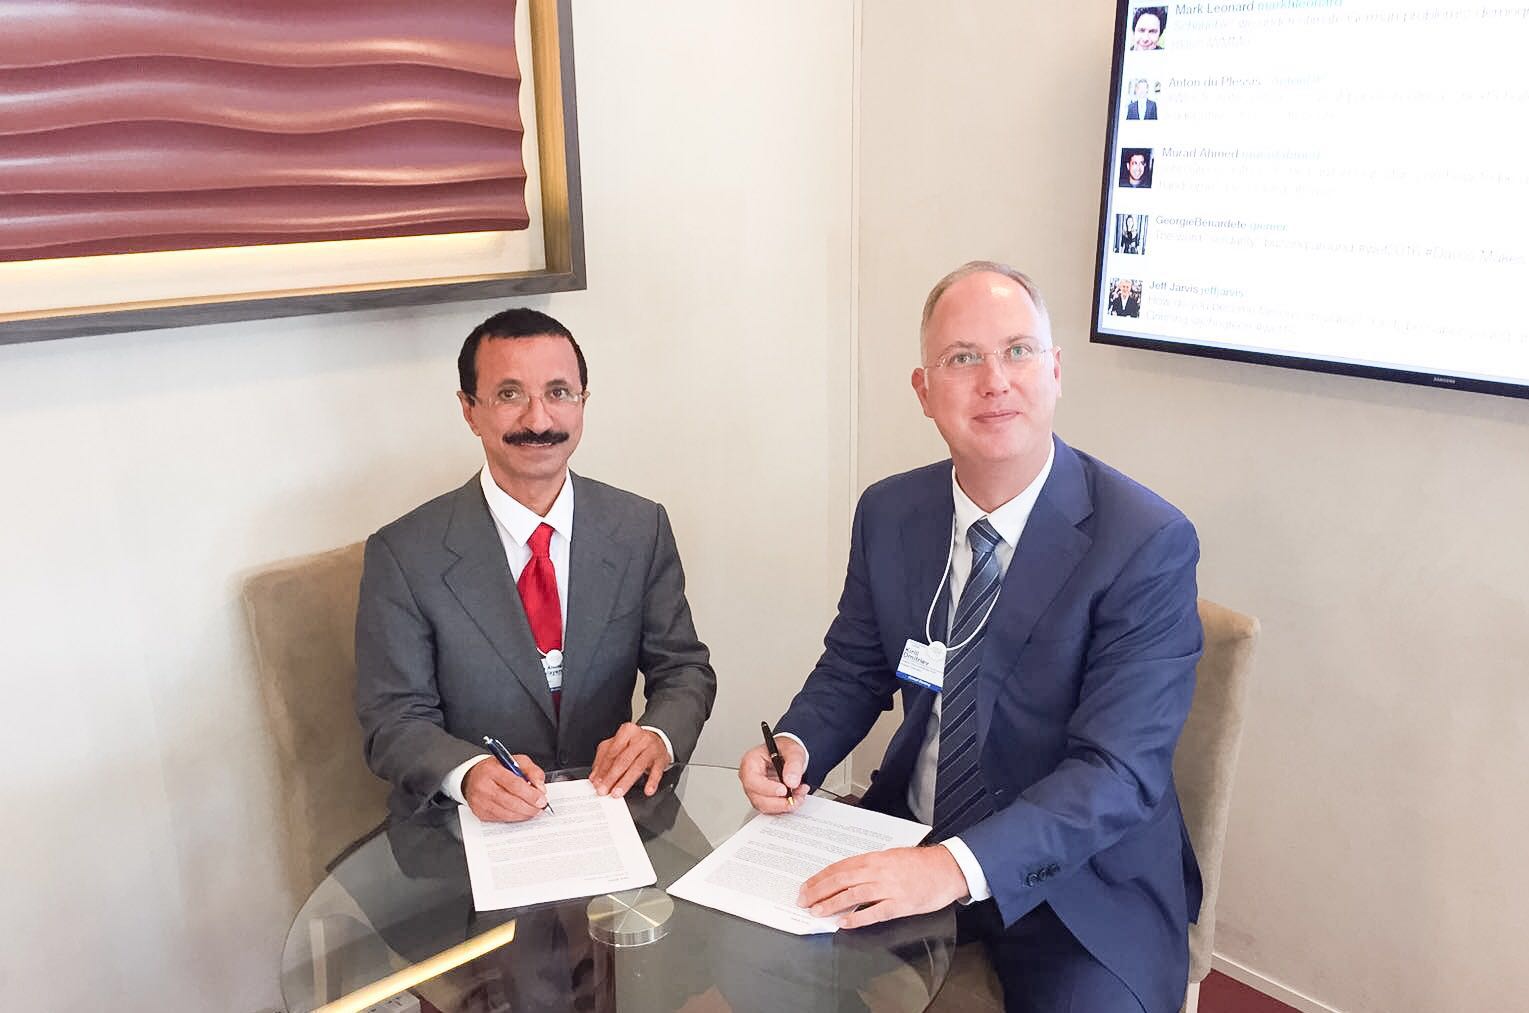 DP World Chairman, His Excellency Sultan Ahmed Bin Sulayem and Russian Direct Investment Fund CEO, Kirill Dmitriev signing the term sheet to form ‘DP World Russia’.